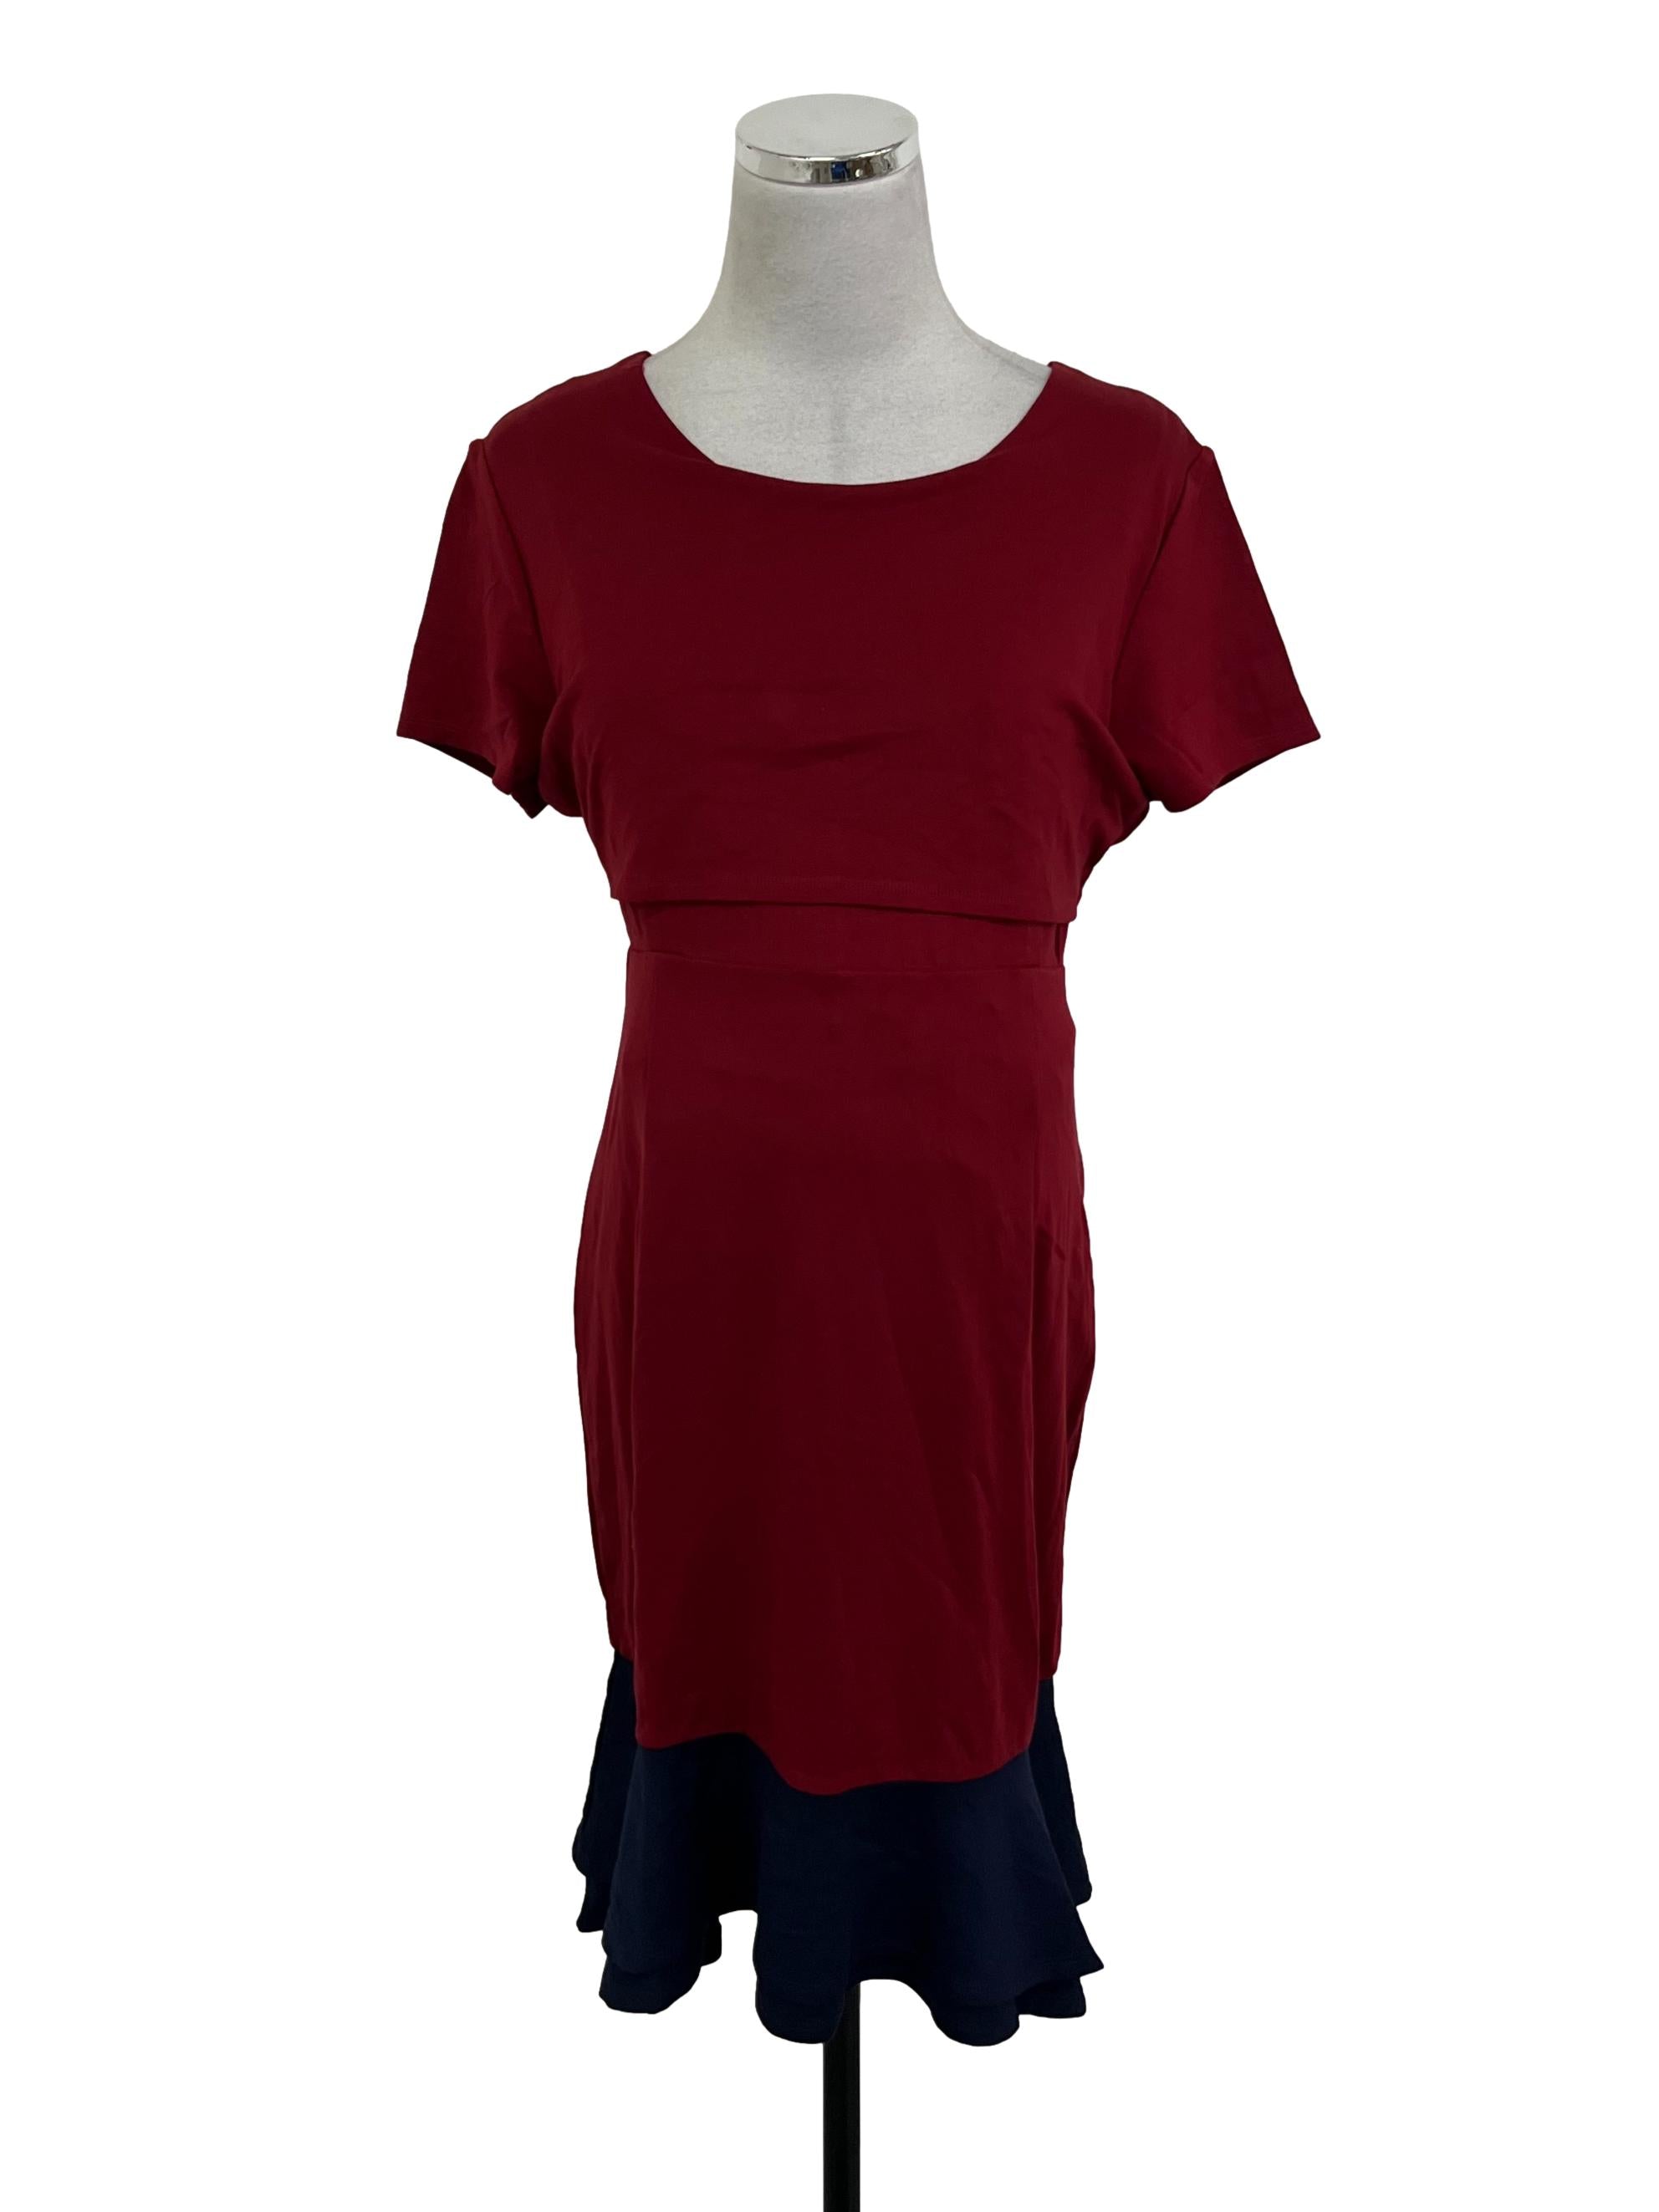 Maroon with Blue Empire Dress